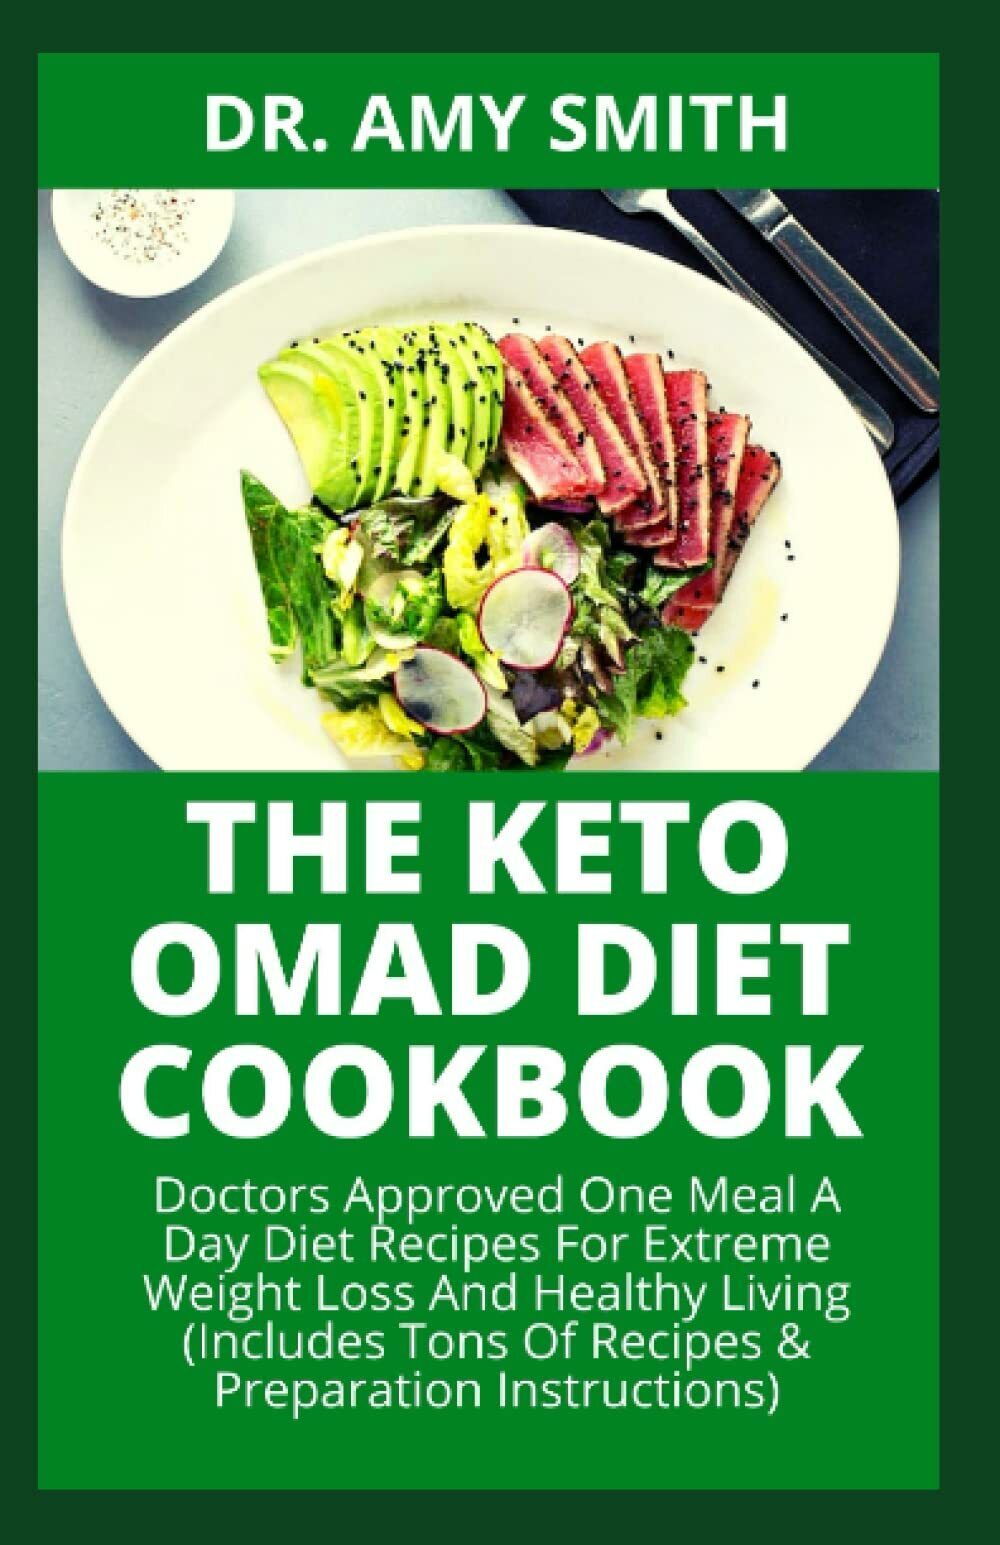 THE KETO OMAD DIET COOKBOOK: Doctors Approved One Meal A Day Diet Recipes For He